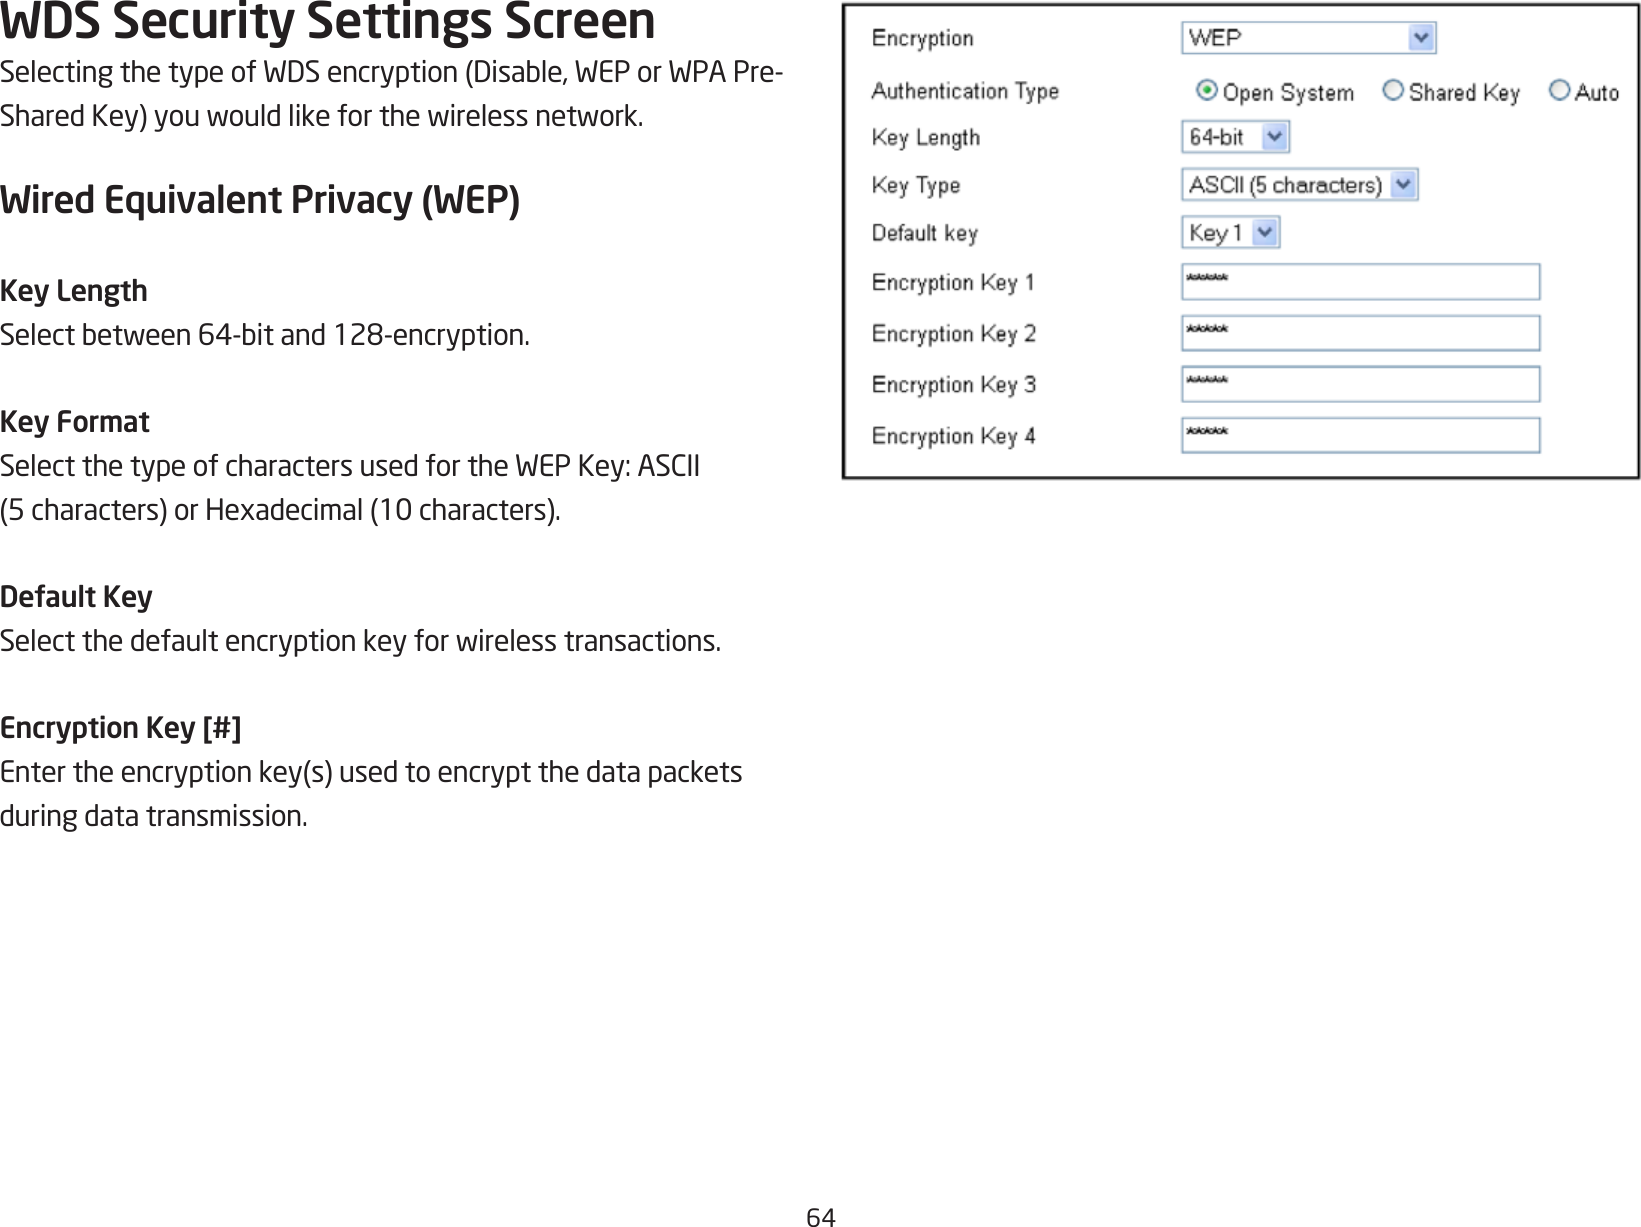 64WDS Security Settings ScreenSelectingthetypeofWDSencryption(Disable,WEPorWPAPre-SharedKey)youwouldlikeforthewirelessnetwork.Wired Equivalent Privacy (WEP)Key LengthSelectbetween64-bitand128-encryption.Key FormatSelectthetypeofcharactersusedfortheWEPKey:ASCII(5characters)orHexadecimal(10characters).Default KeySelectthedefaultencryptionkeyforwirelesstransactions.Encryption Key [#]Entertheencryptionkey(s)usedtoencryptthedatapacketsduring data transmission.